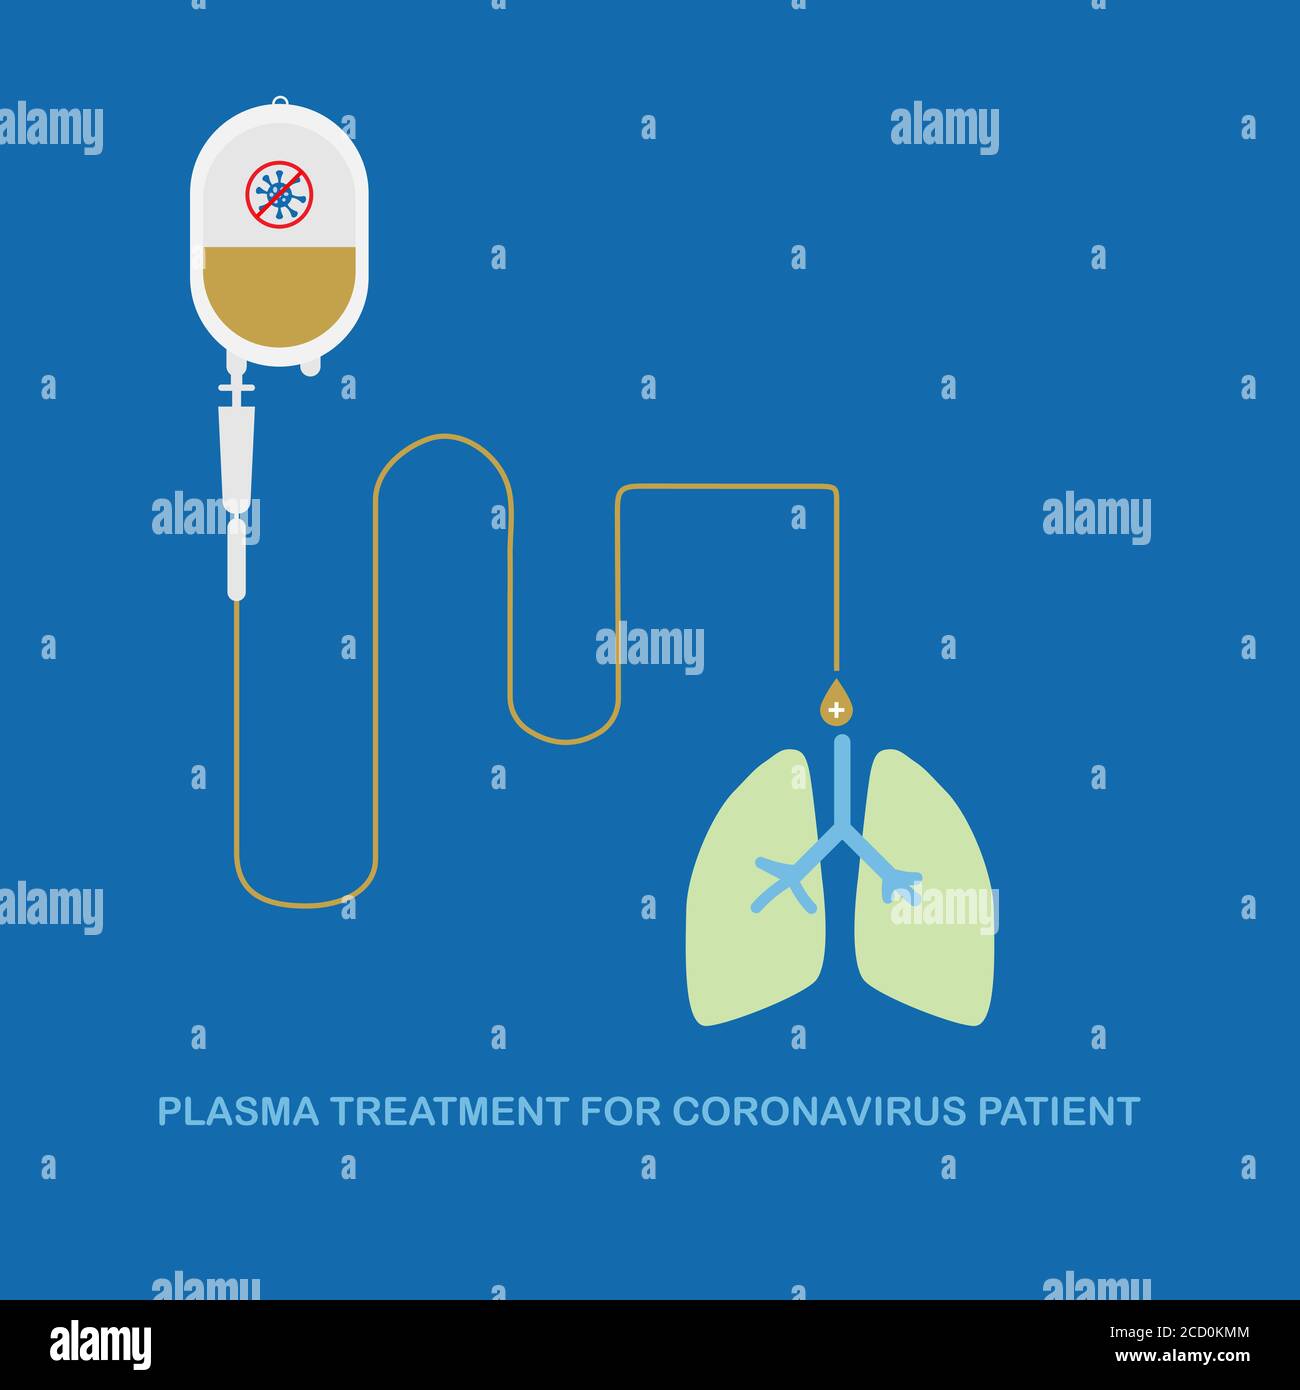 Concept of plasma treatment for coronavirus infection. Plasma treatment helps for the recovery in severely ill patient. Illustration of plasma bag and Stock Vector